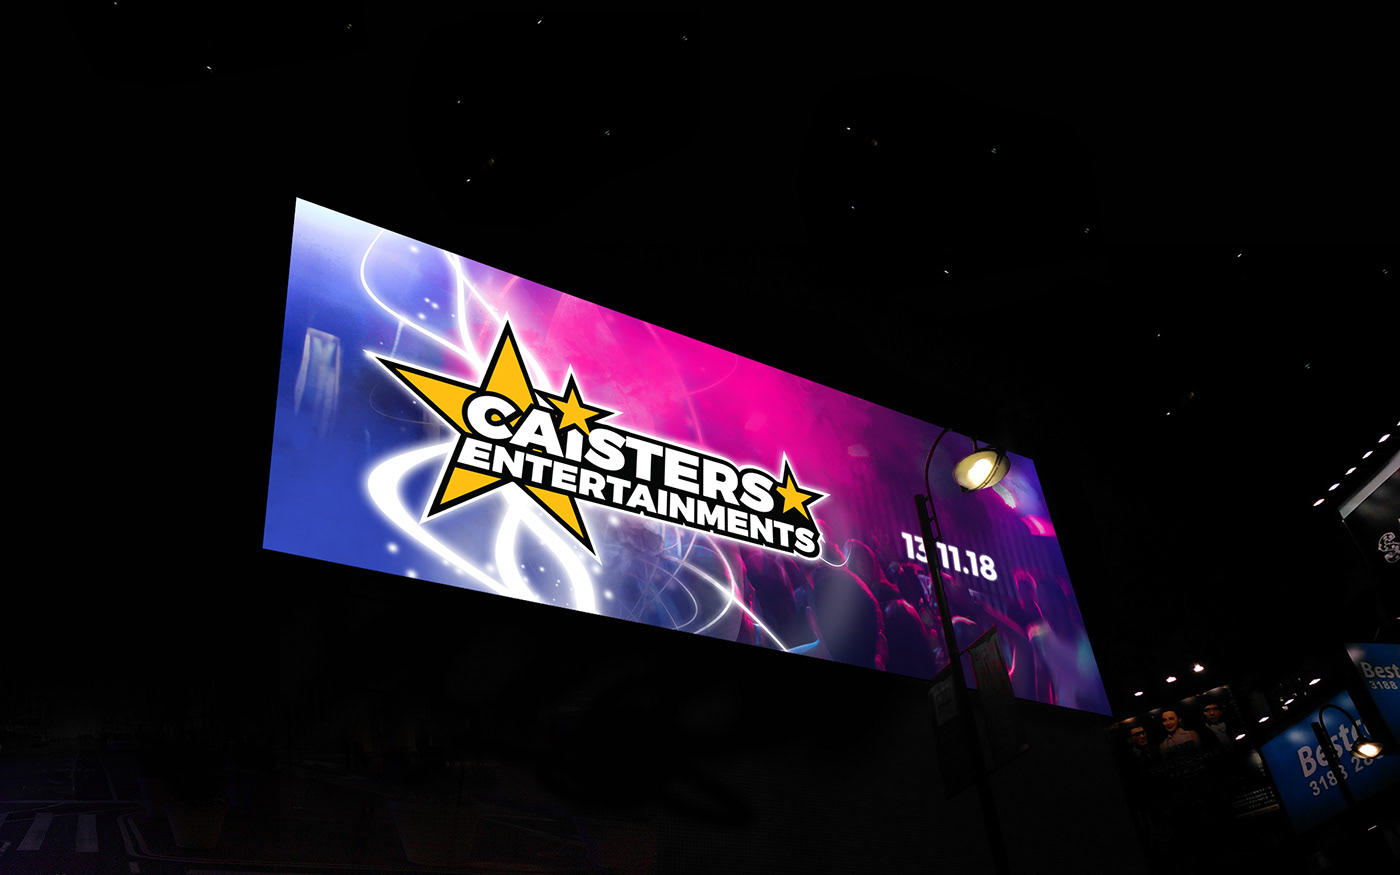 entertainments Acts tributes caisters entertainments hampshire portsmouth